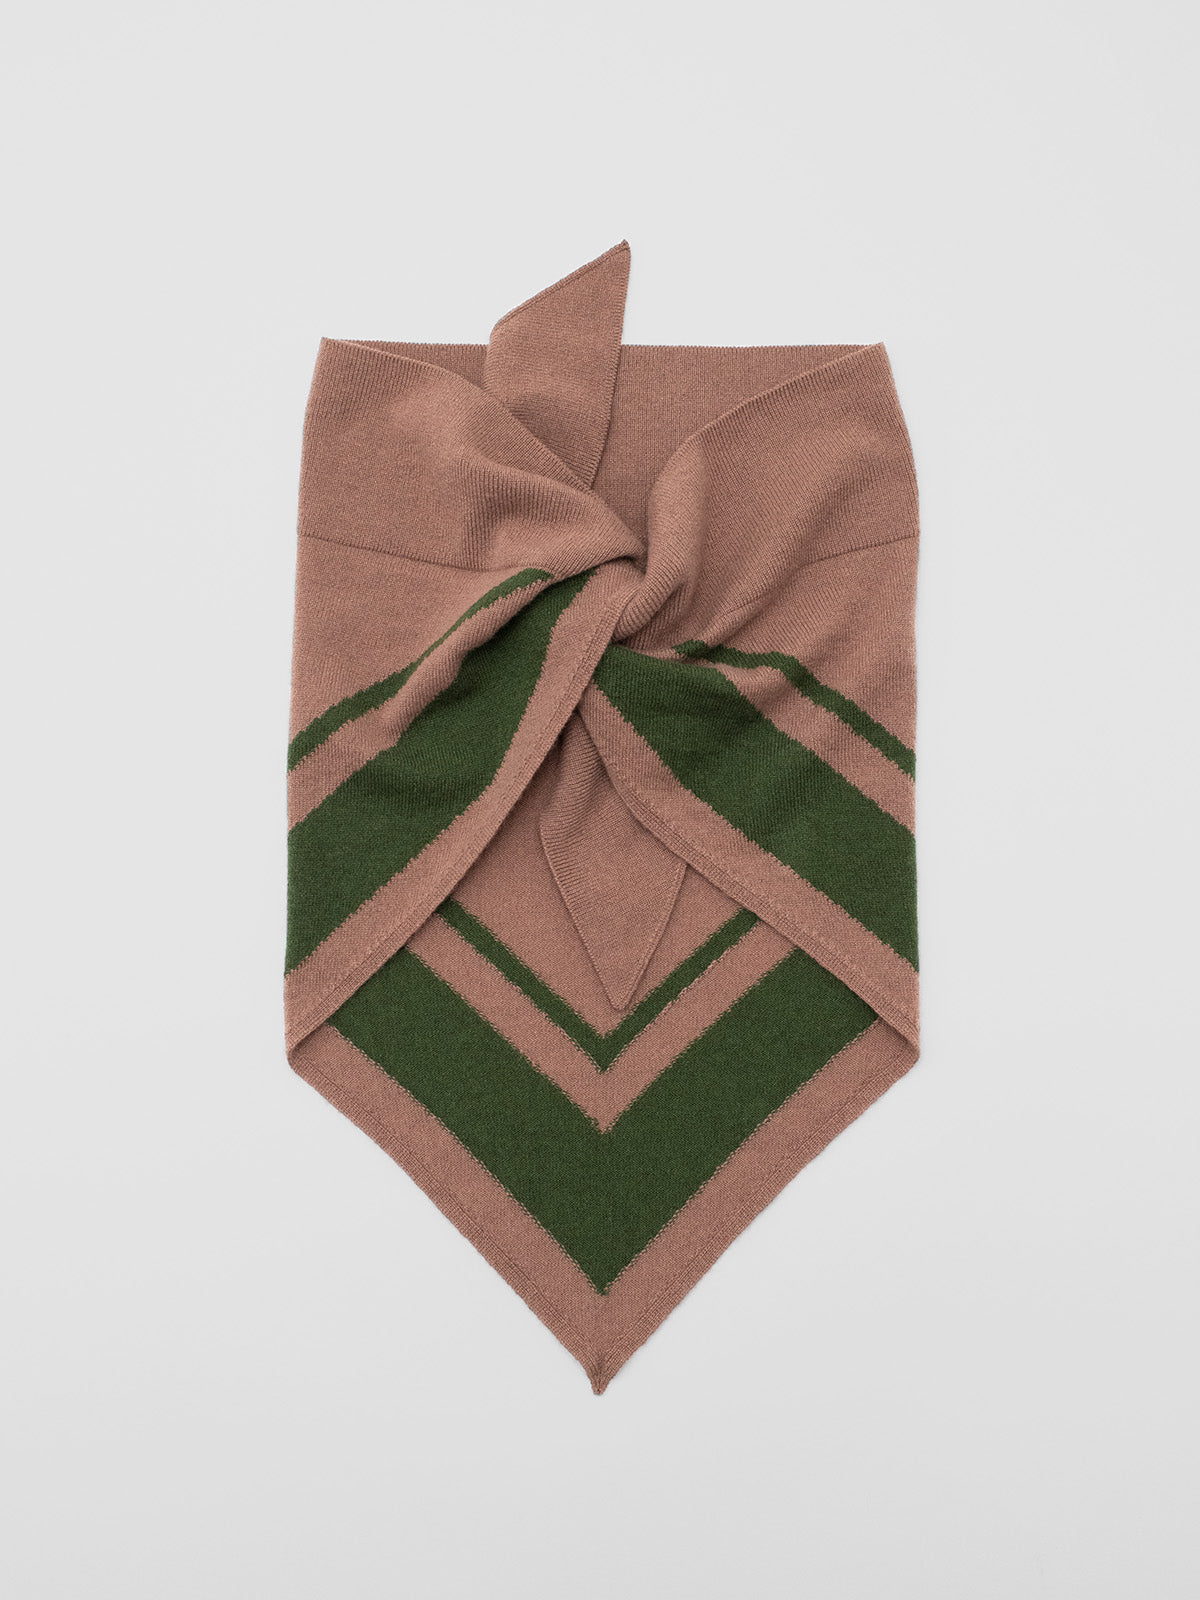 WILLOW / CASHMERE SCARF / ROSÉ-GREEN